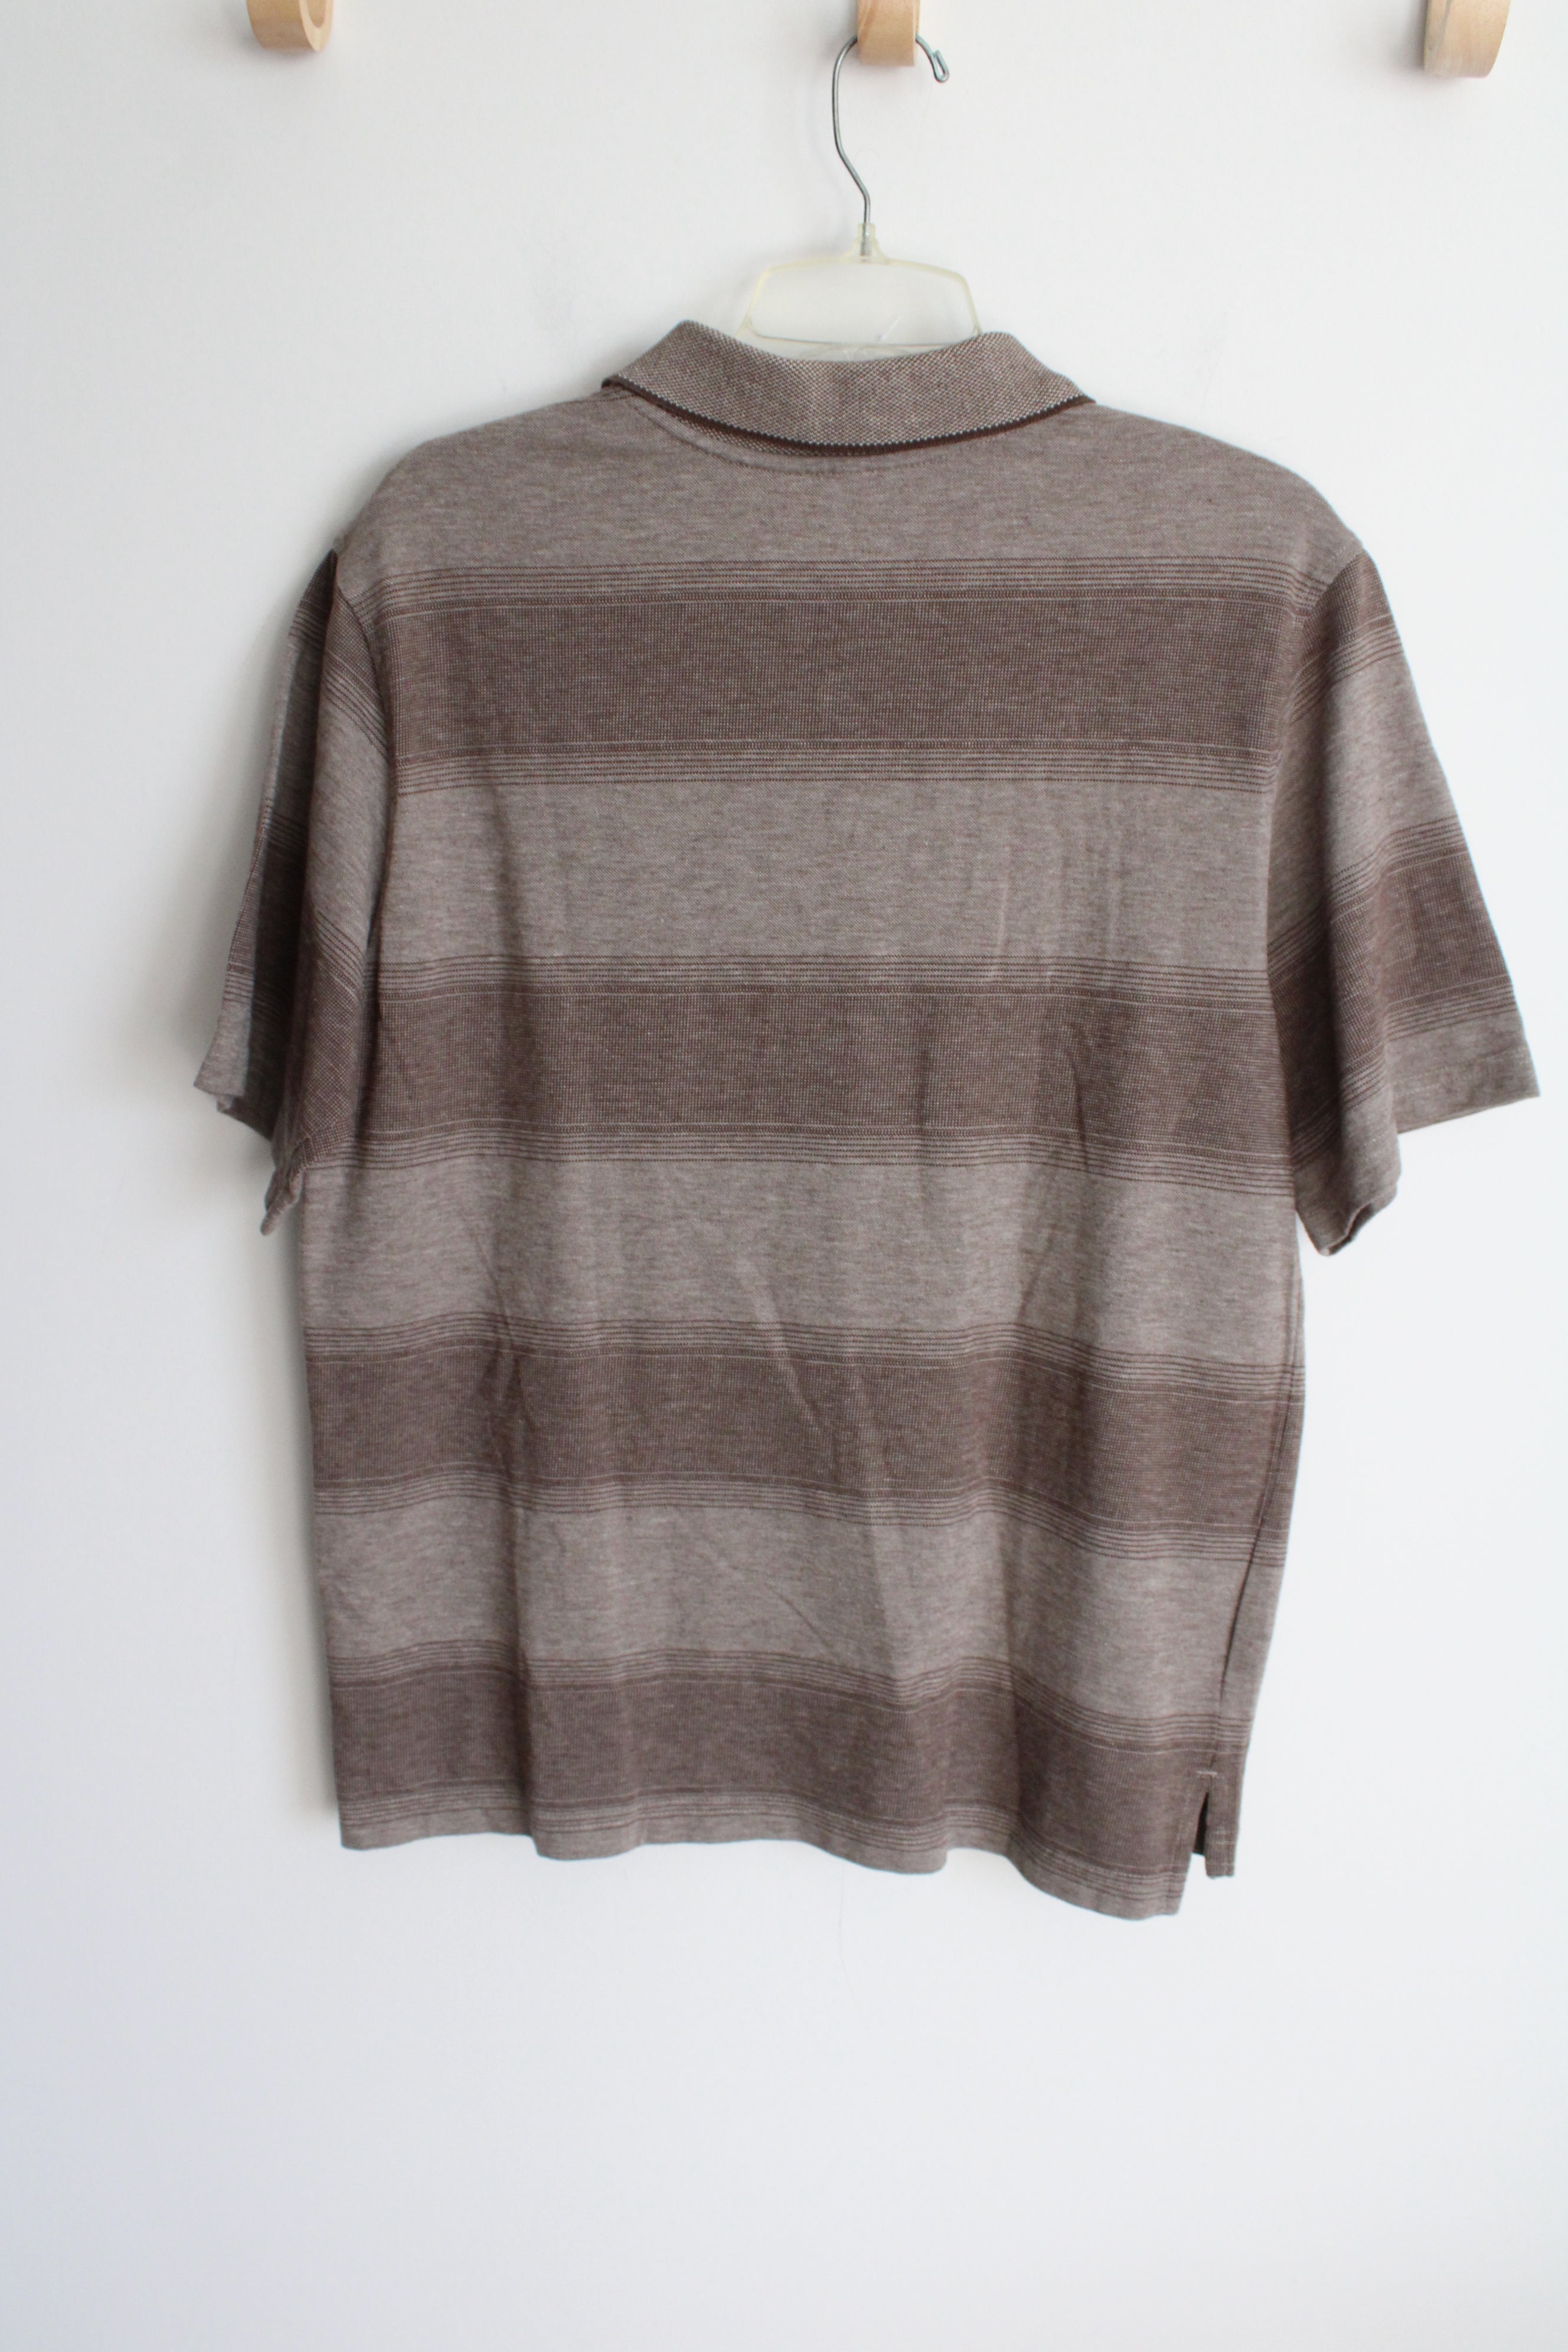 Open Trails Brown Striped Polo Shirt | M